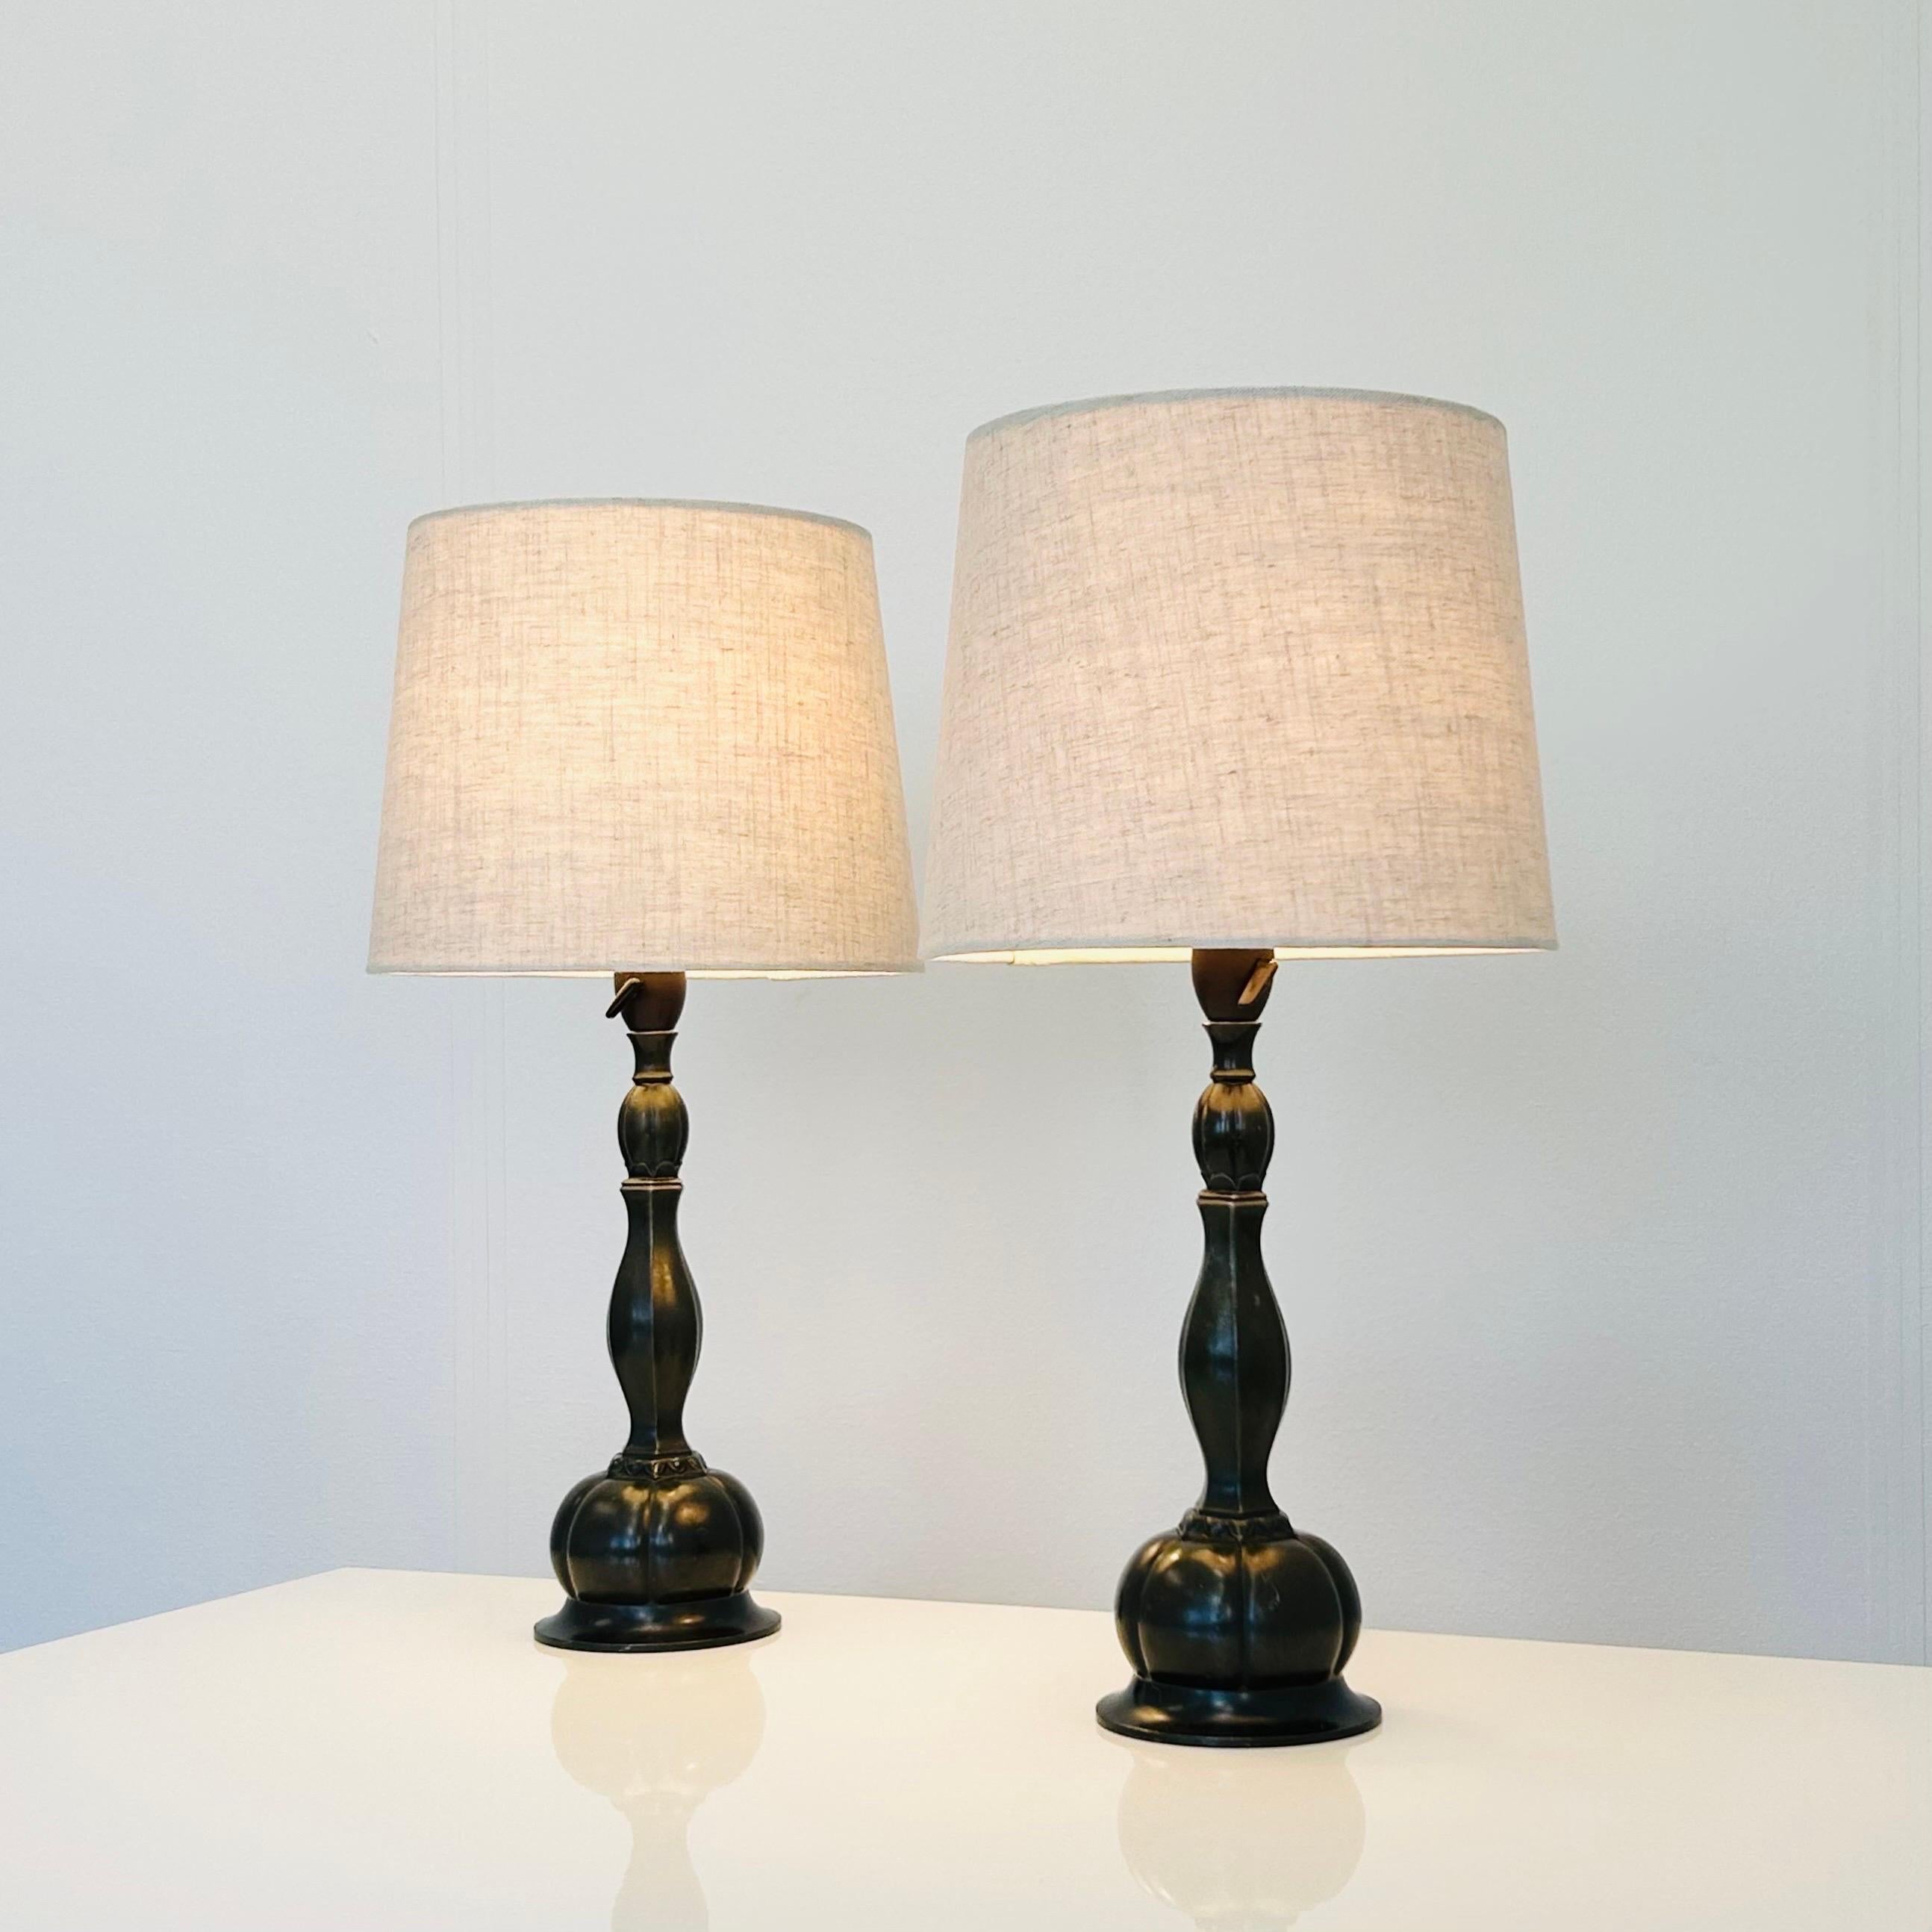 An exquisite set of early Just Andersen table lamps.

Crafted from Disko metal, an alloy invented by the Danish designer himself, these lamps exude a unique and timeless charm. Engraved with 'Just D60' model number, these lamps were created